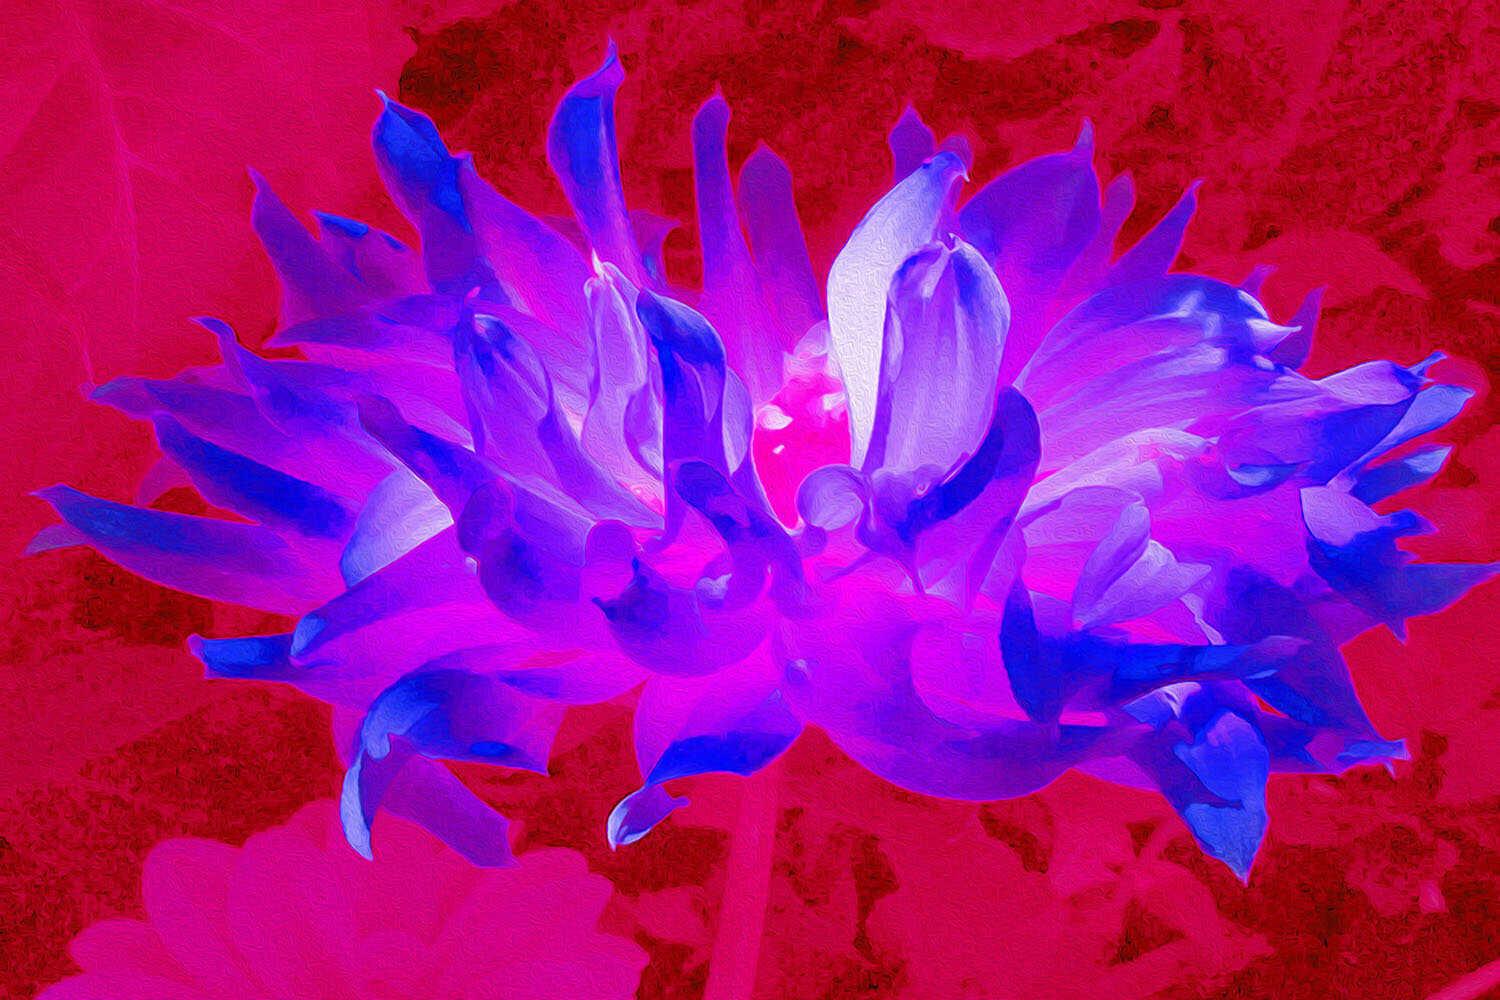 Stunning Violet Blue and Hot Pink Cactus Dahlia